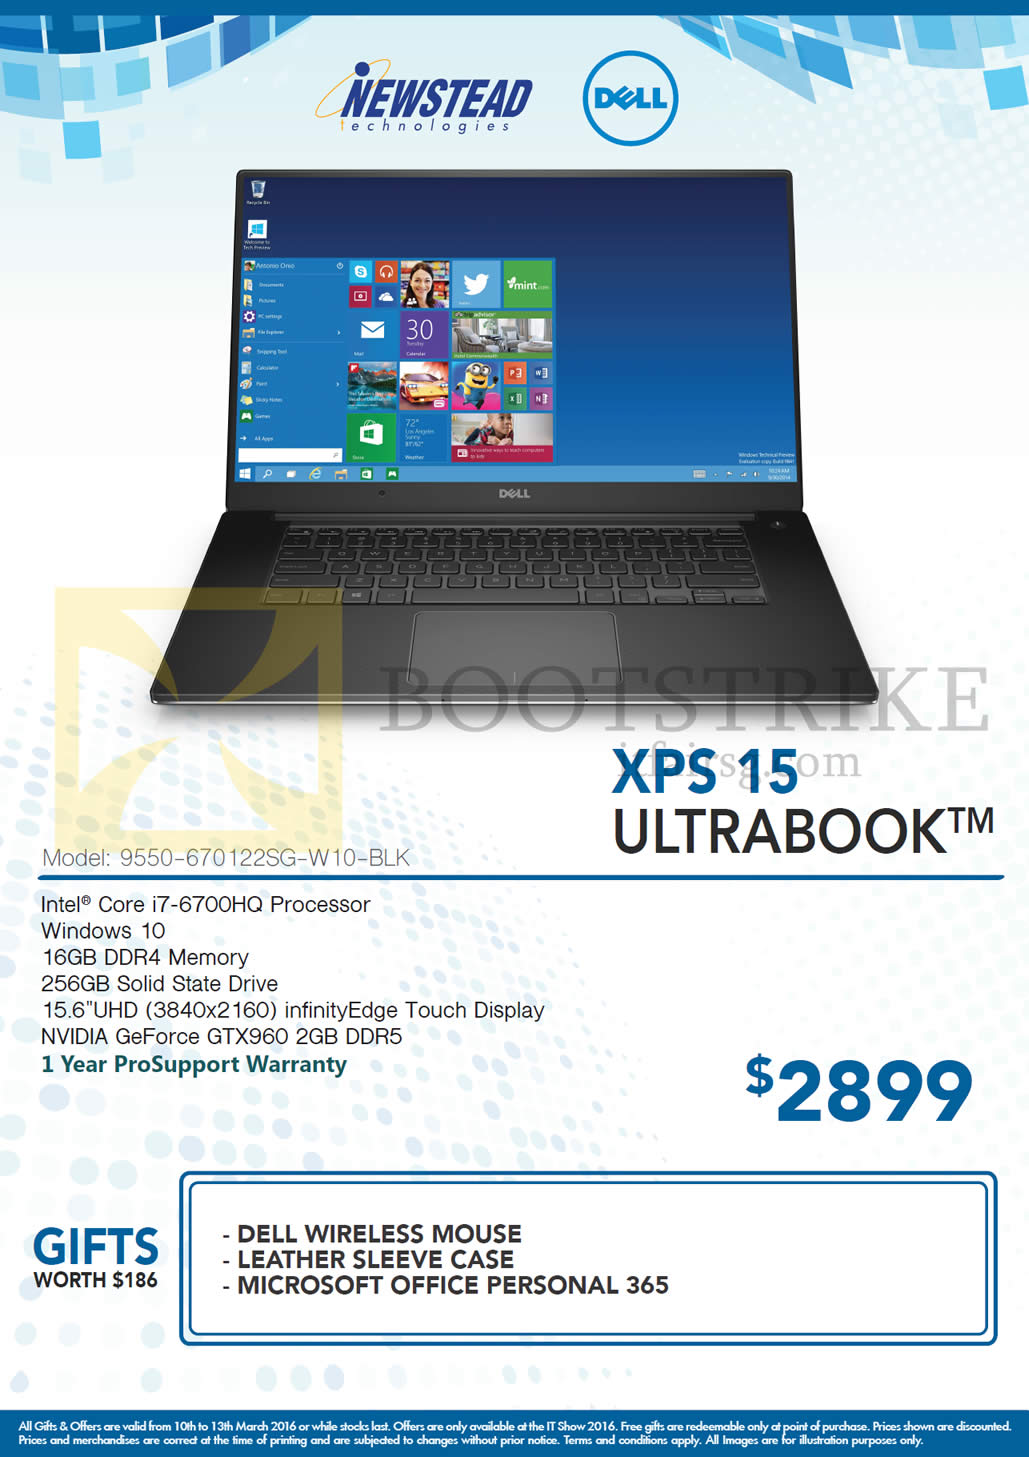 IT SHOW 2016 price list image brochure of Dell Newstead Notebook XPS 15